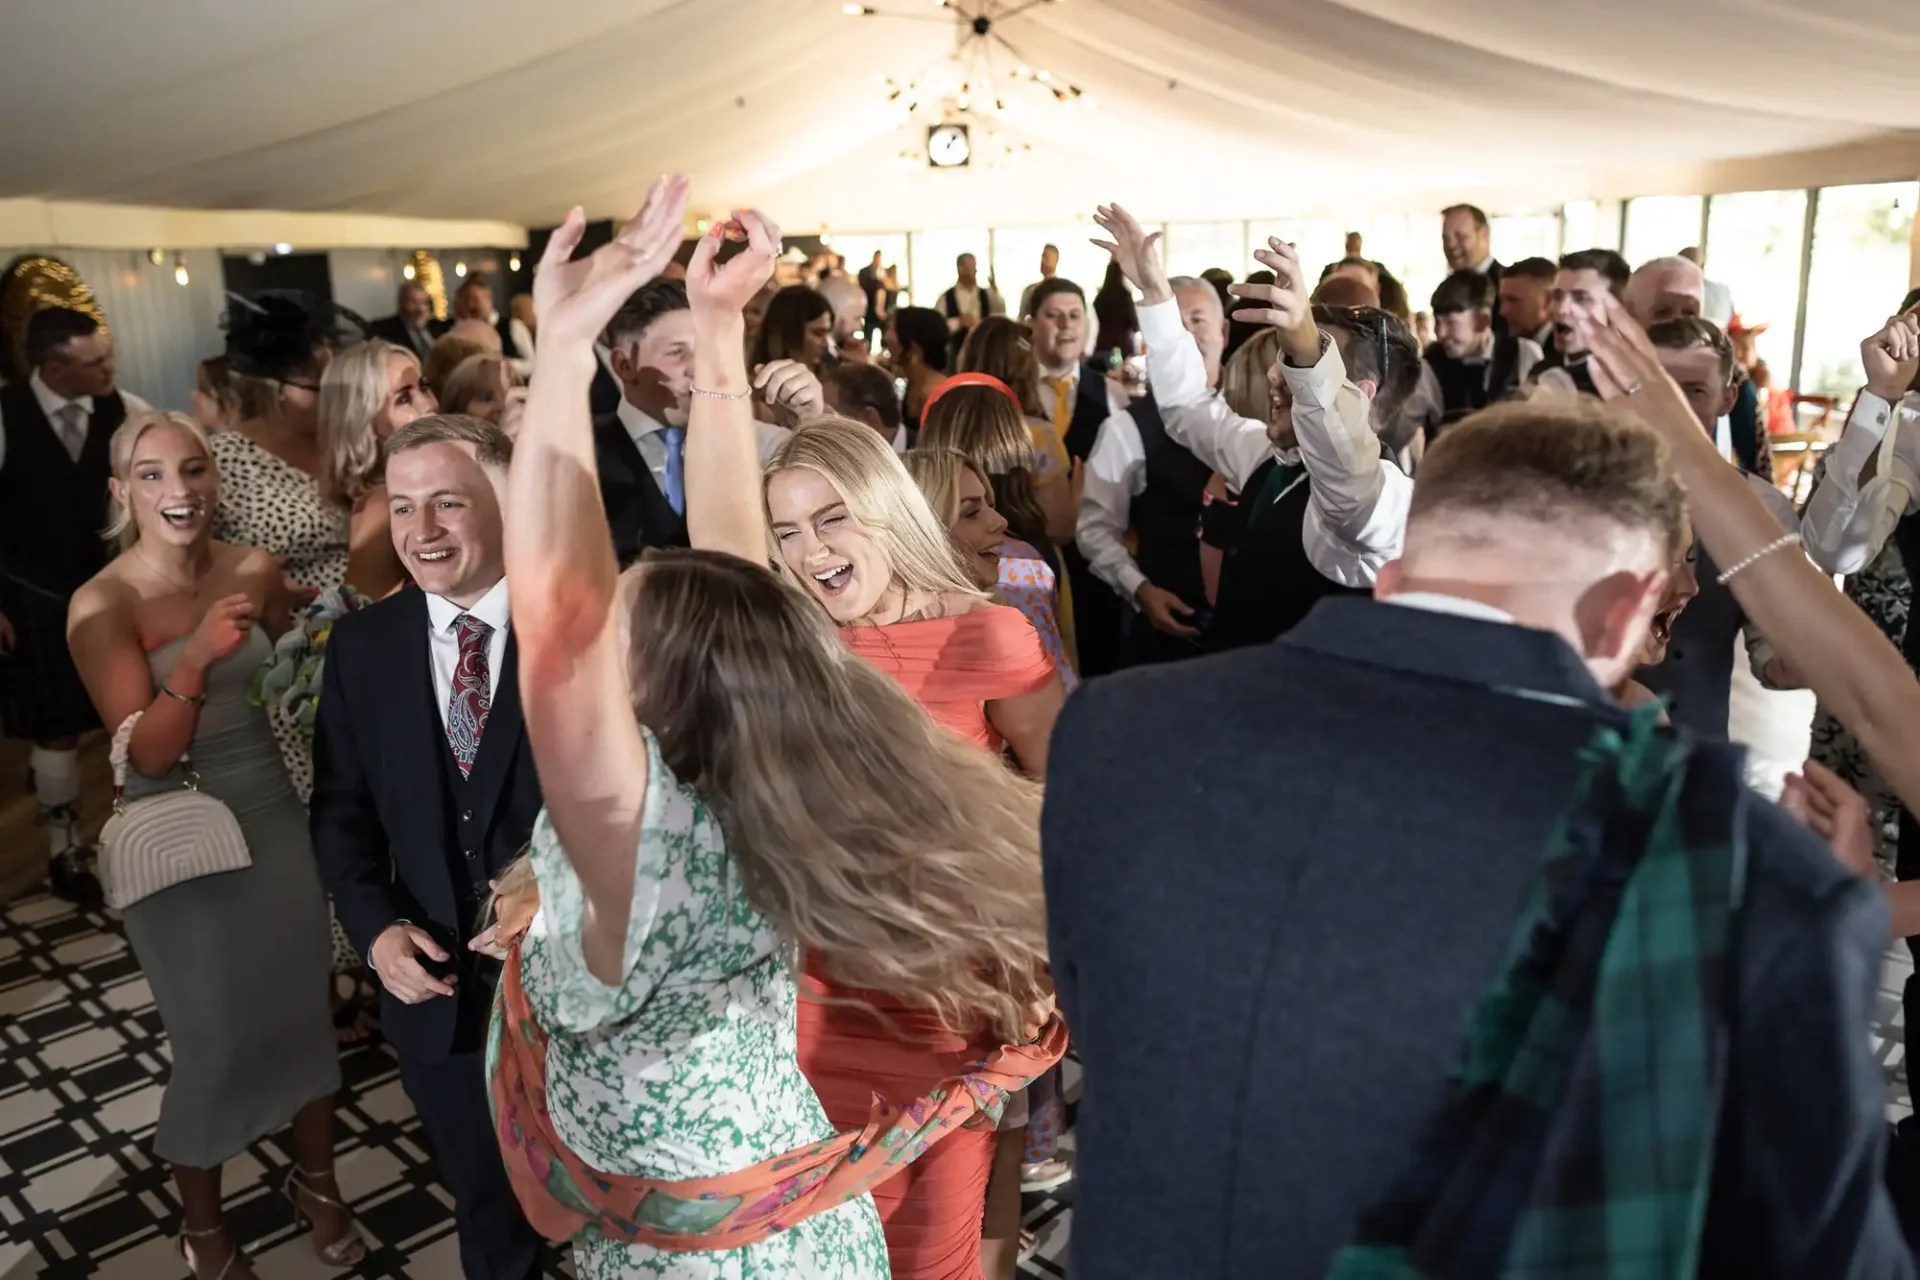 Guests joyfully dancing and celebrating at a wedding reception inside a tent.